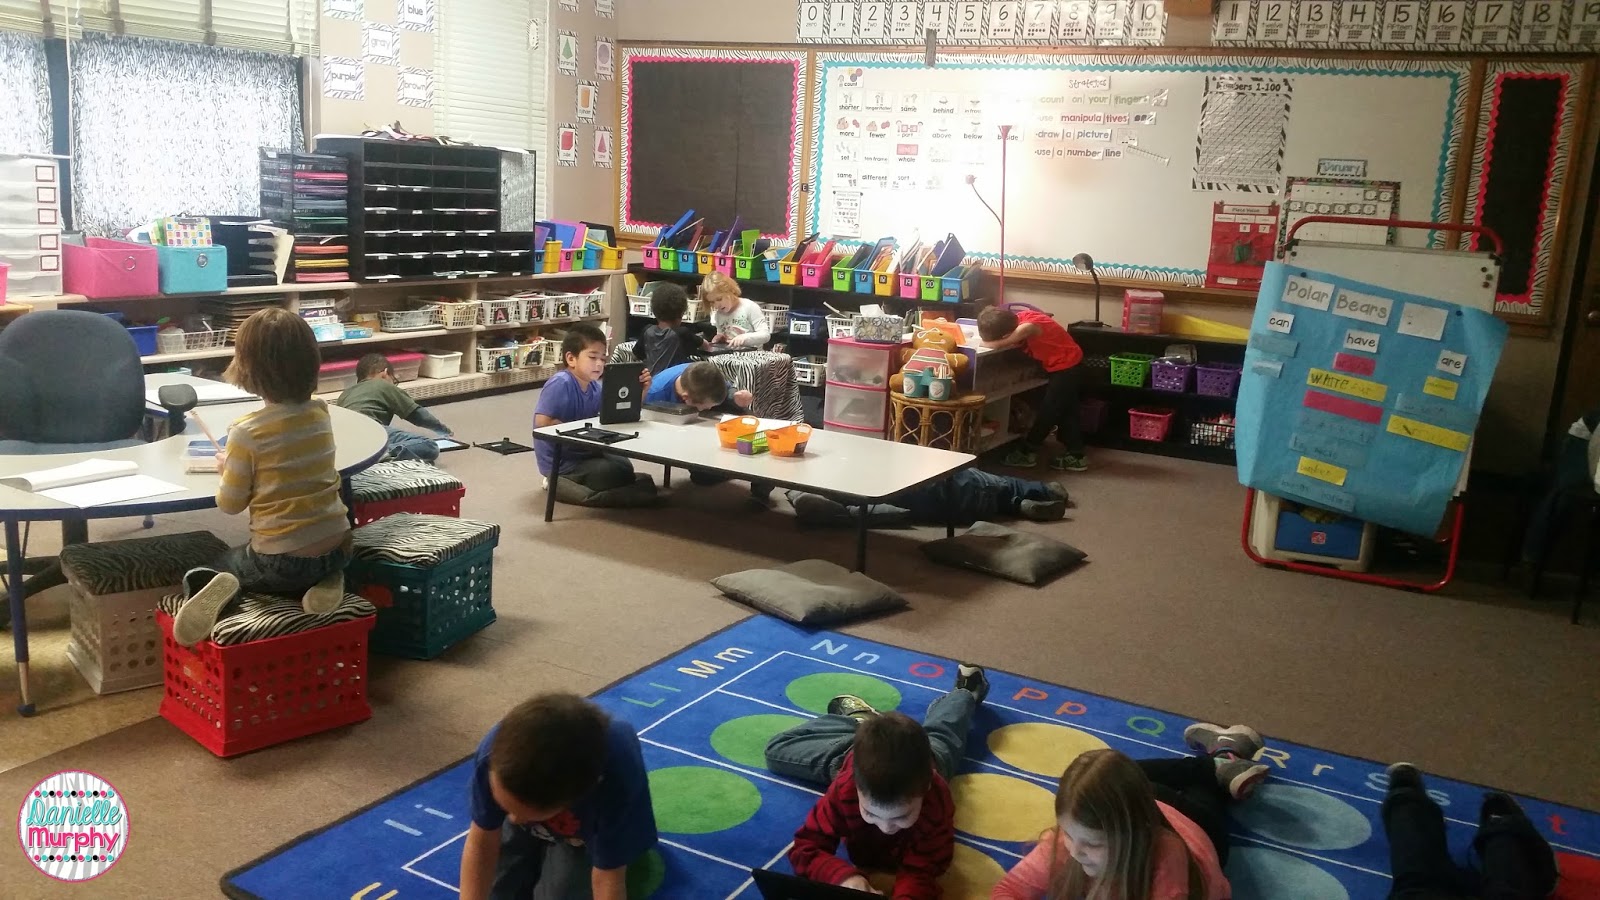 this is an image of a classroom with flexible seating